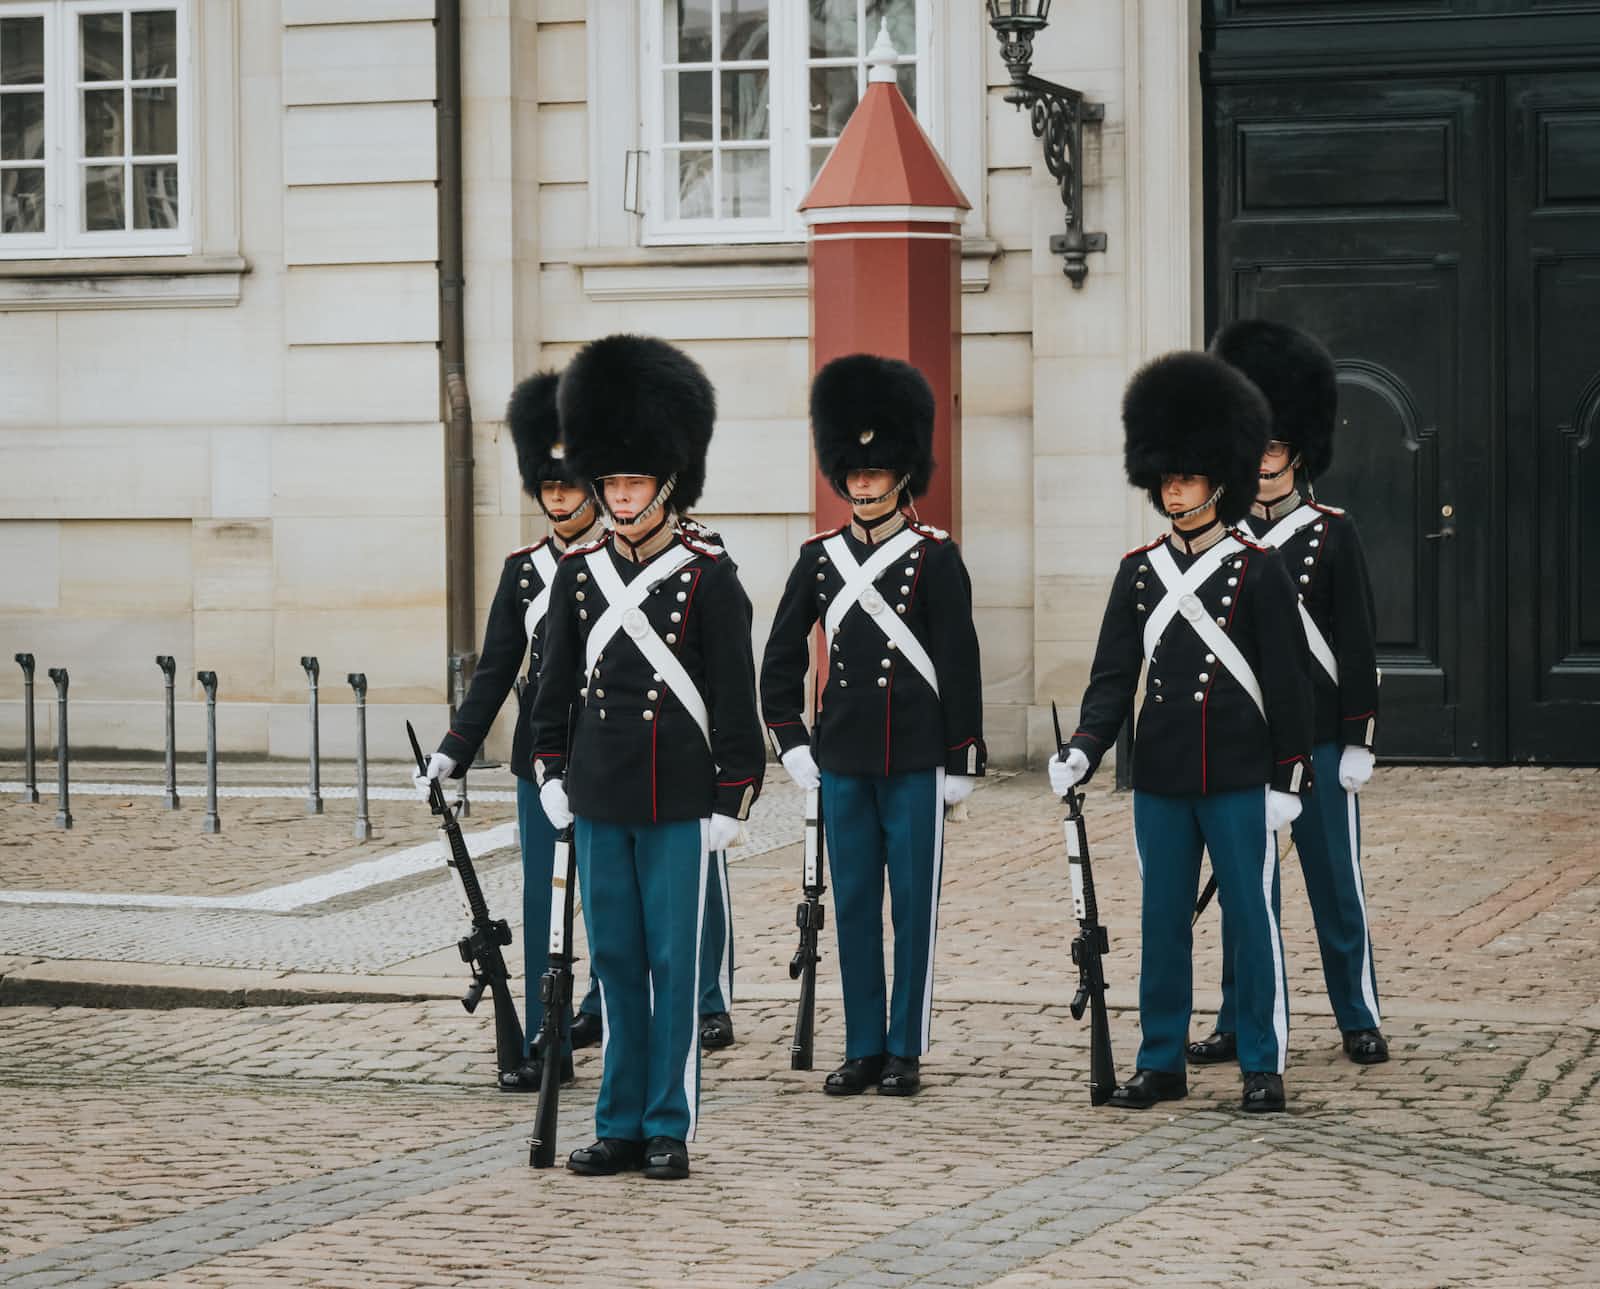 A group of Scots guards wear bearskin caps standing guard